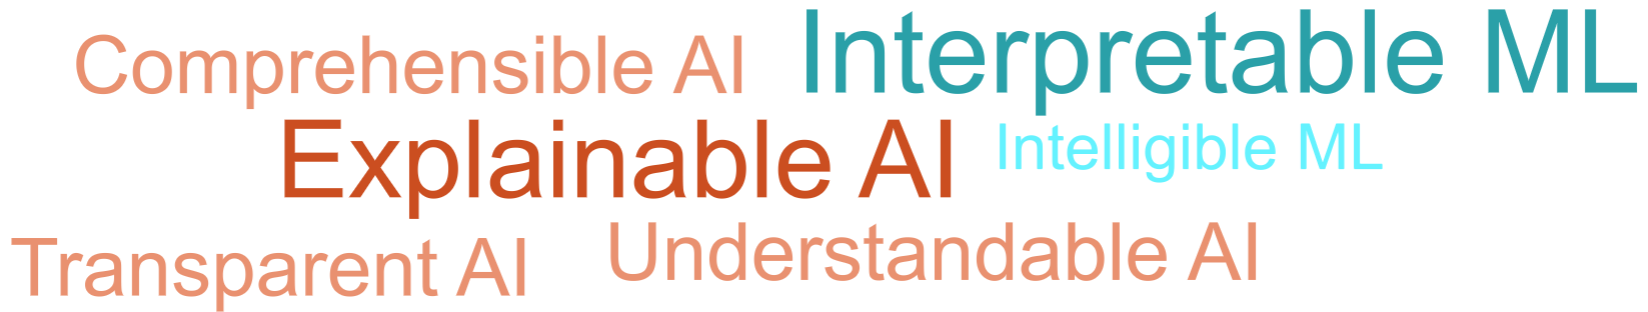 Word cloud with different terms for explainable AI